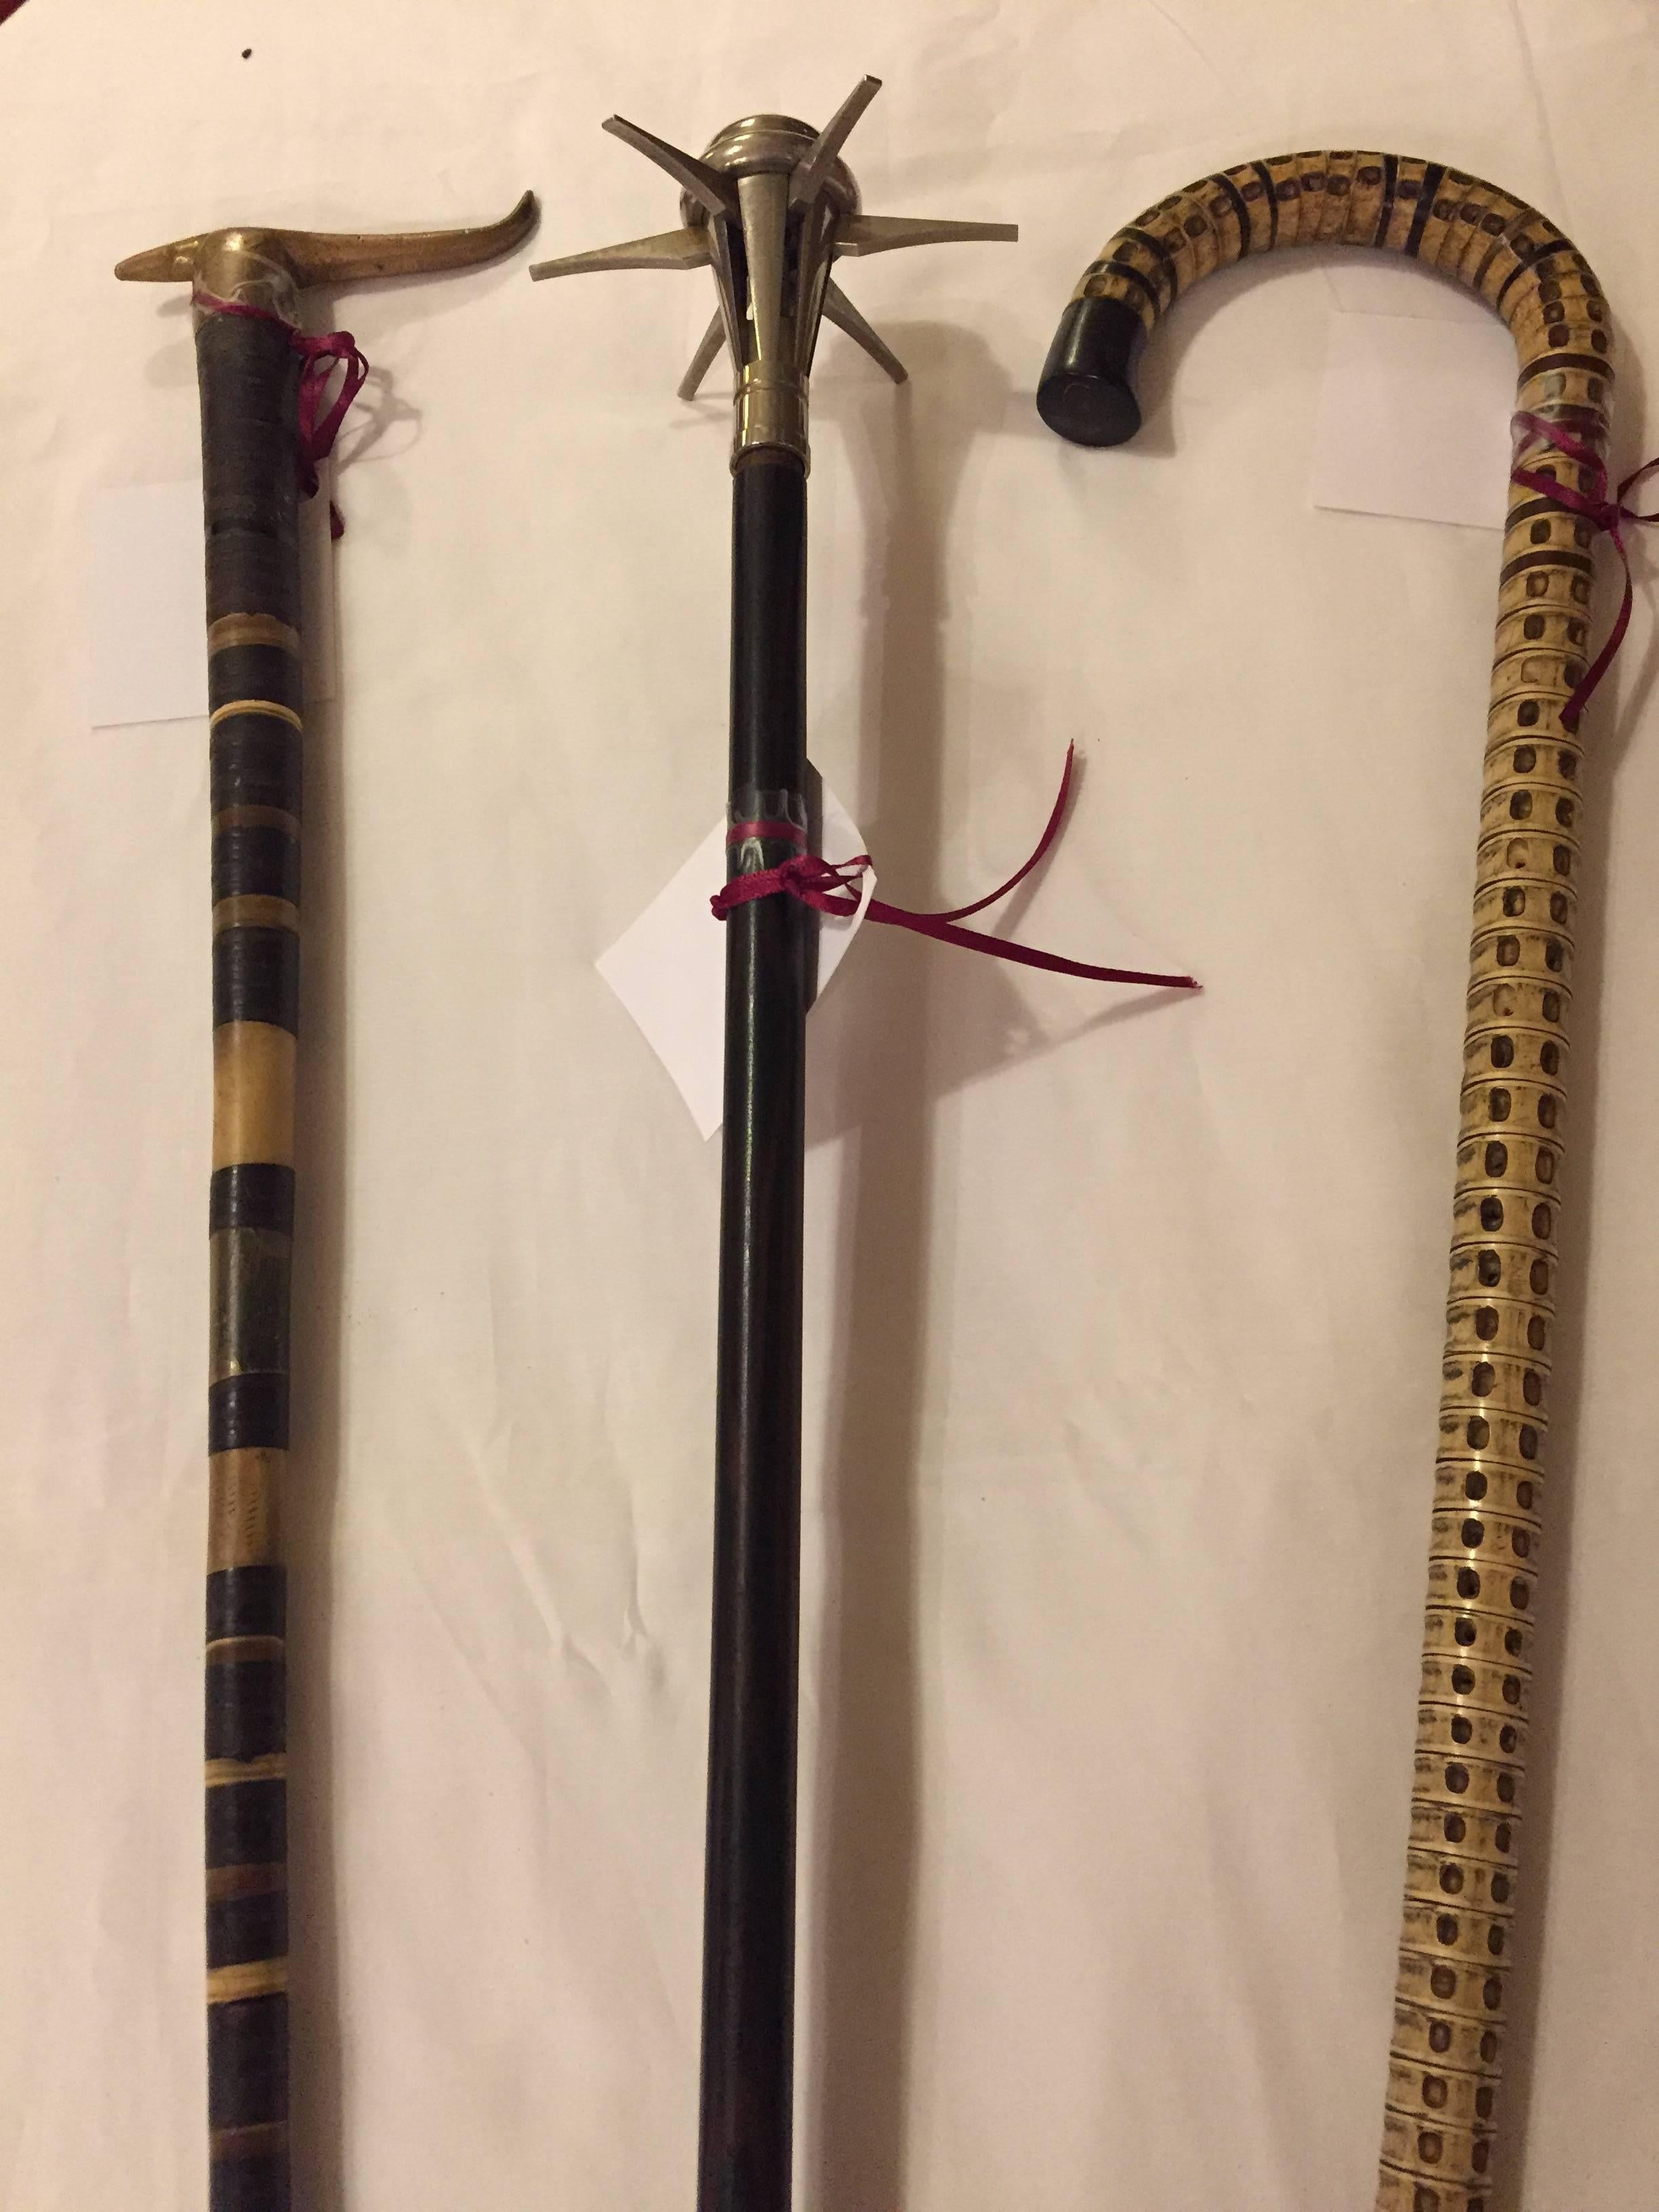 Vintage group of three of a vast collection of walking canes or walking sticks. Price listed is for all three sticks however, you may purchase one stick if only one stick is wanted.

409-C4 Elephant training stick 
409-C5 French Spike stick